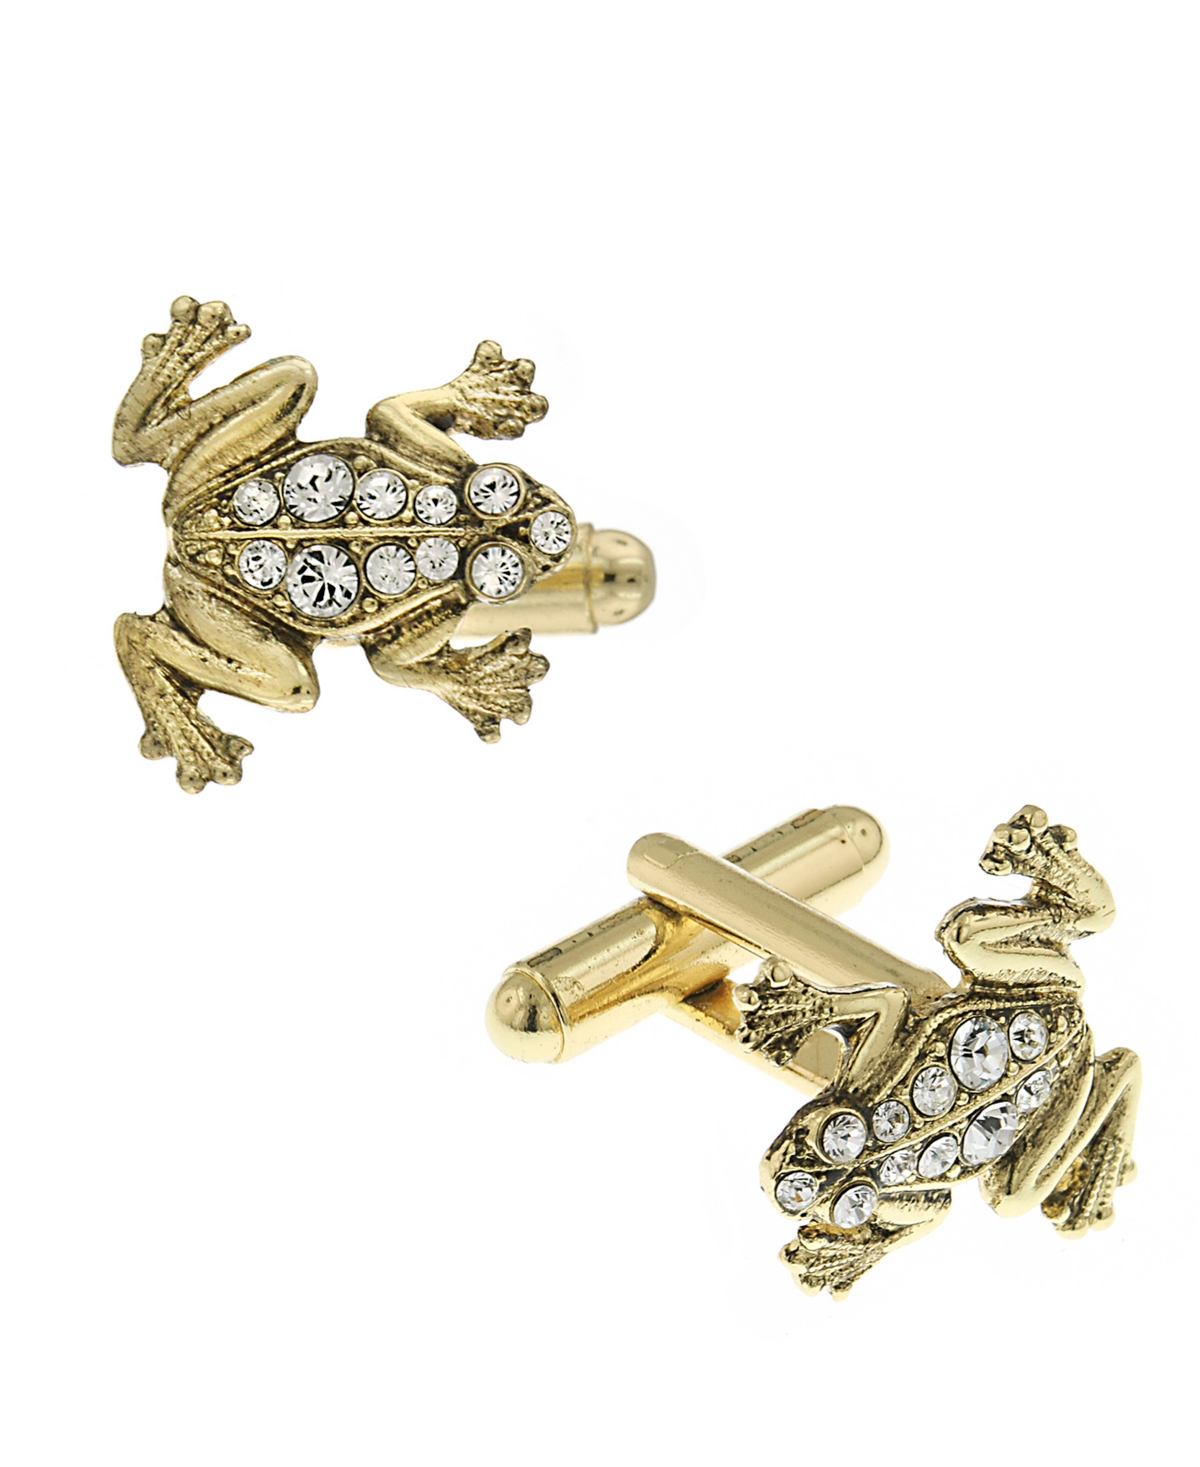 1928 Jewelry 14k Gold Plated Crystal Frog Cufflinks